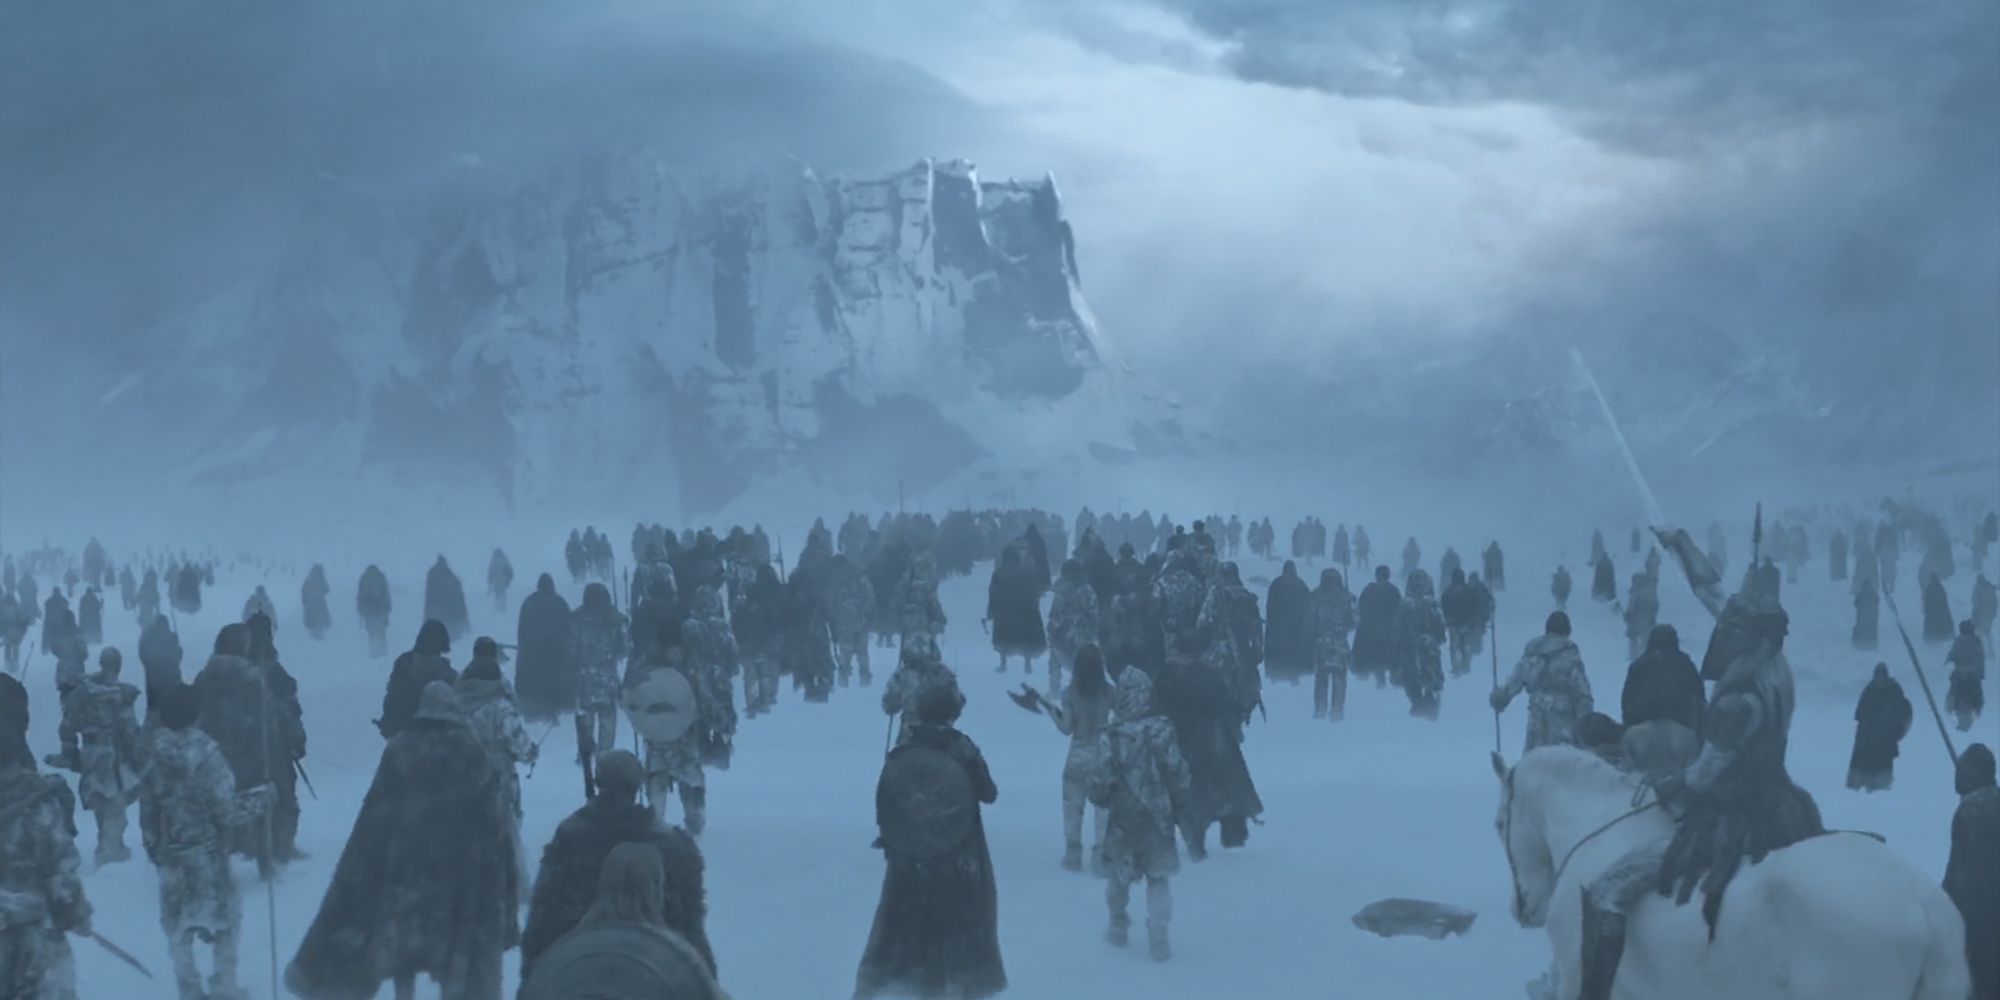 Beyond the Wall in Game of Thrones.